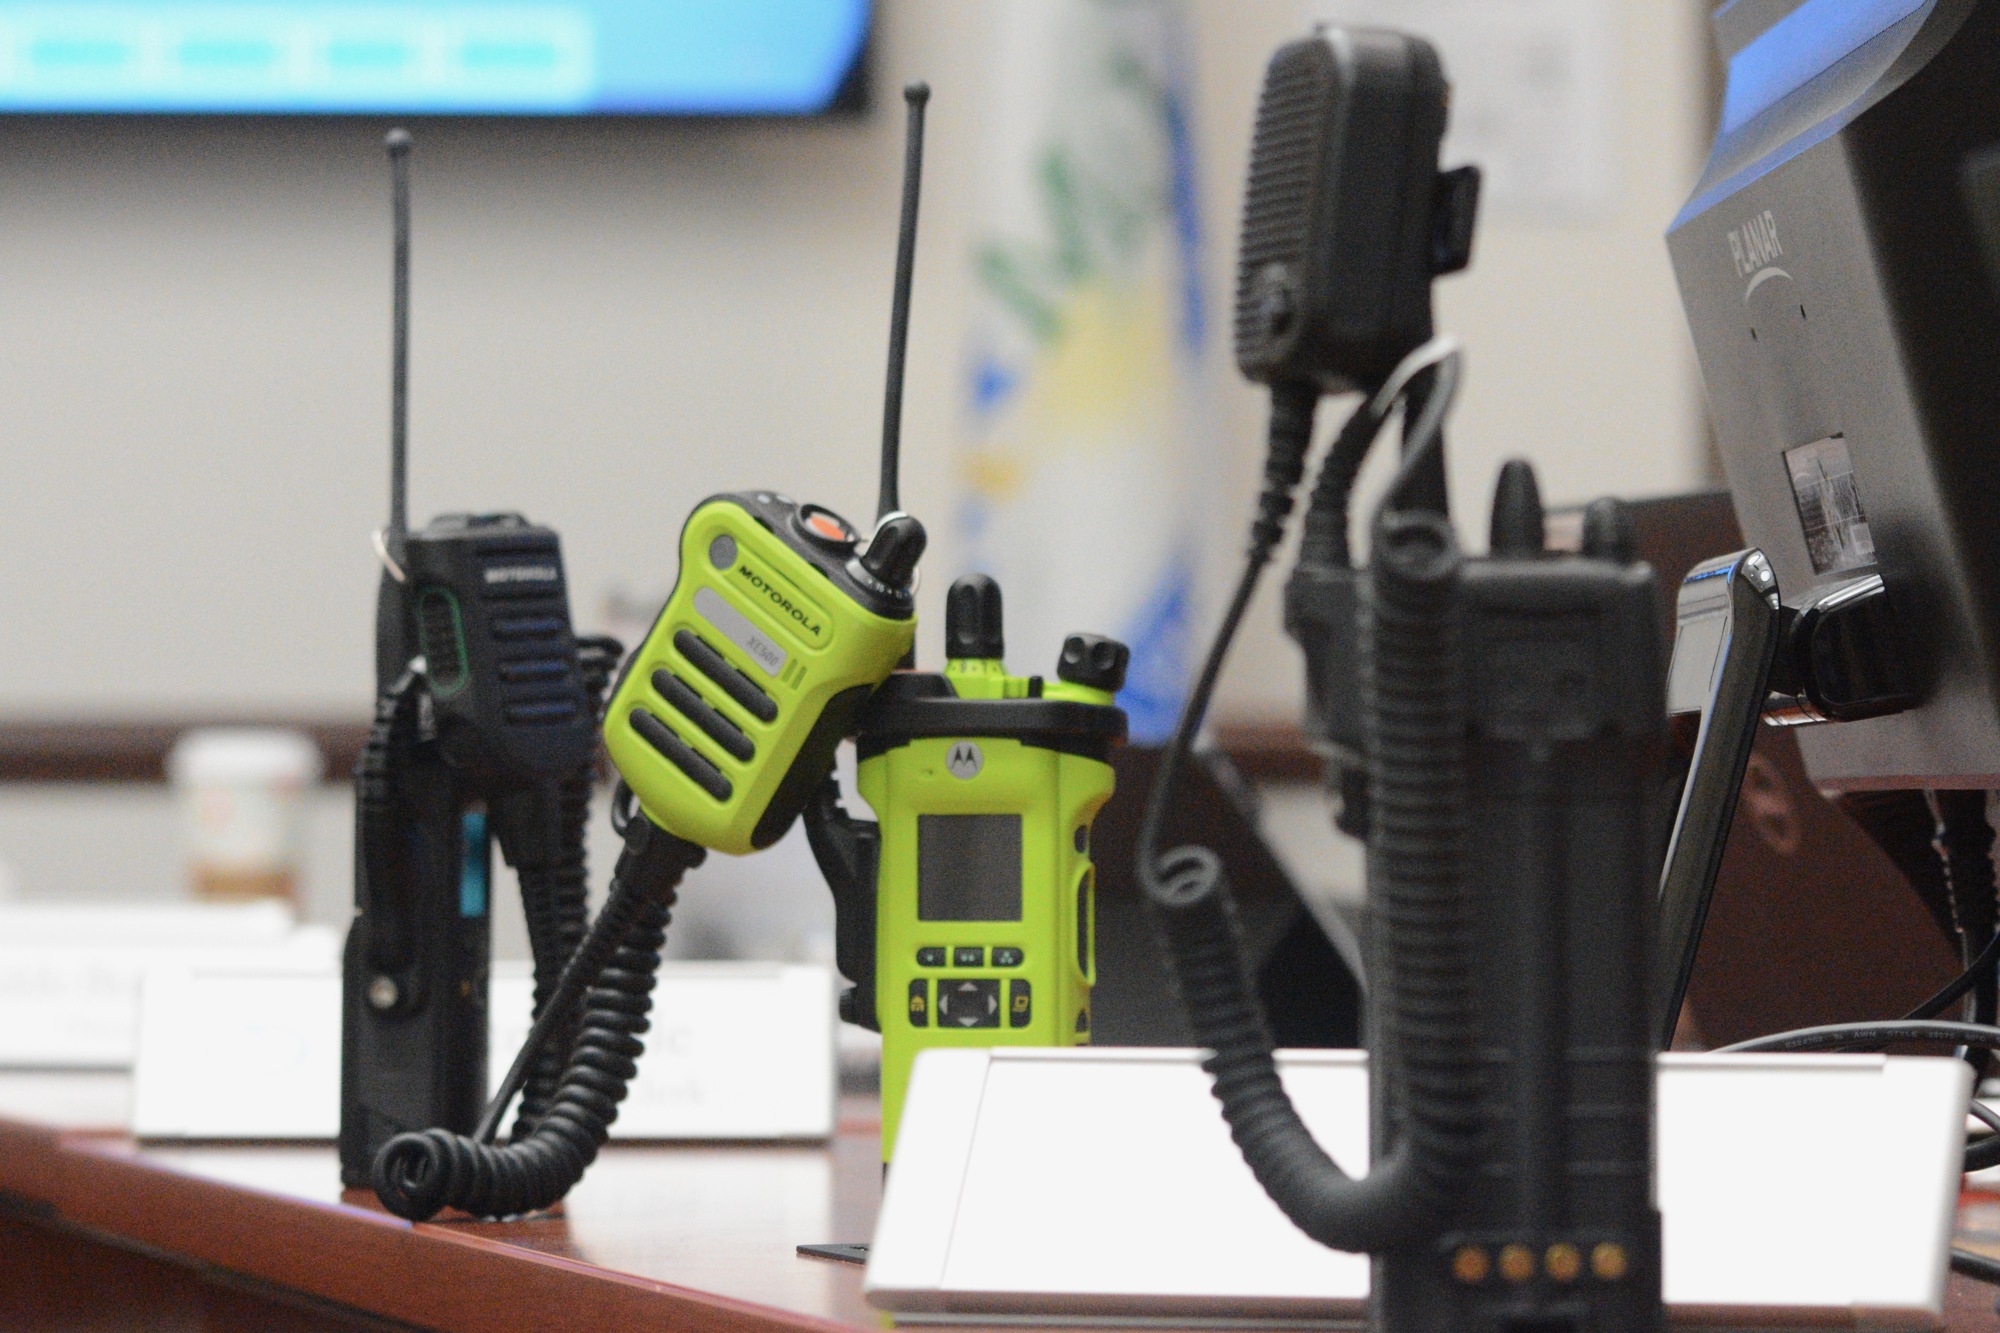 Handheld units for the new radio system. The units, made by Motorola, will have GPS tracking and will be waterproof. The lime ones designed for fire rescue will be intrinsically safe. (Photo by Jonathan Simmons)